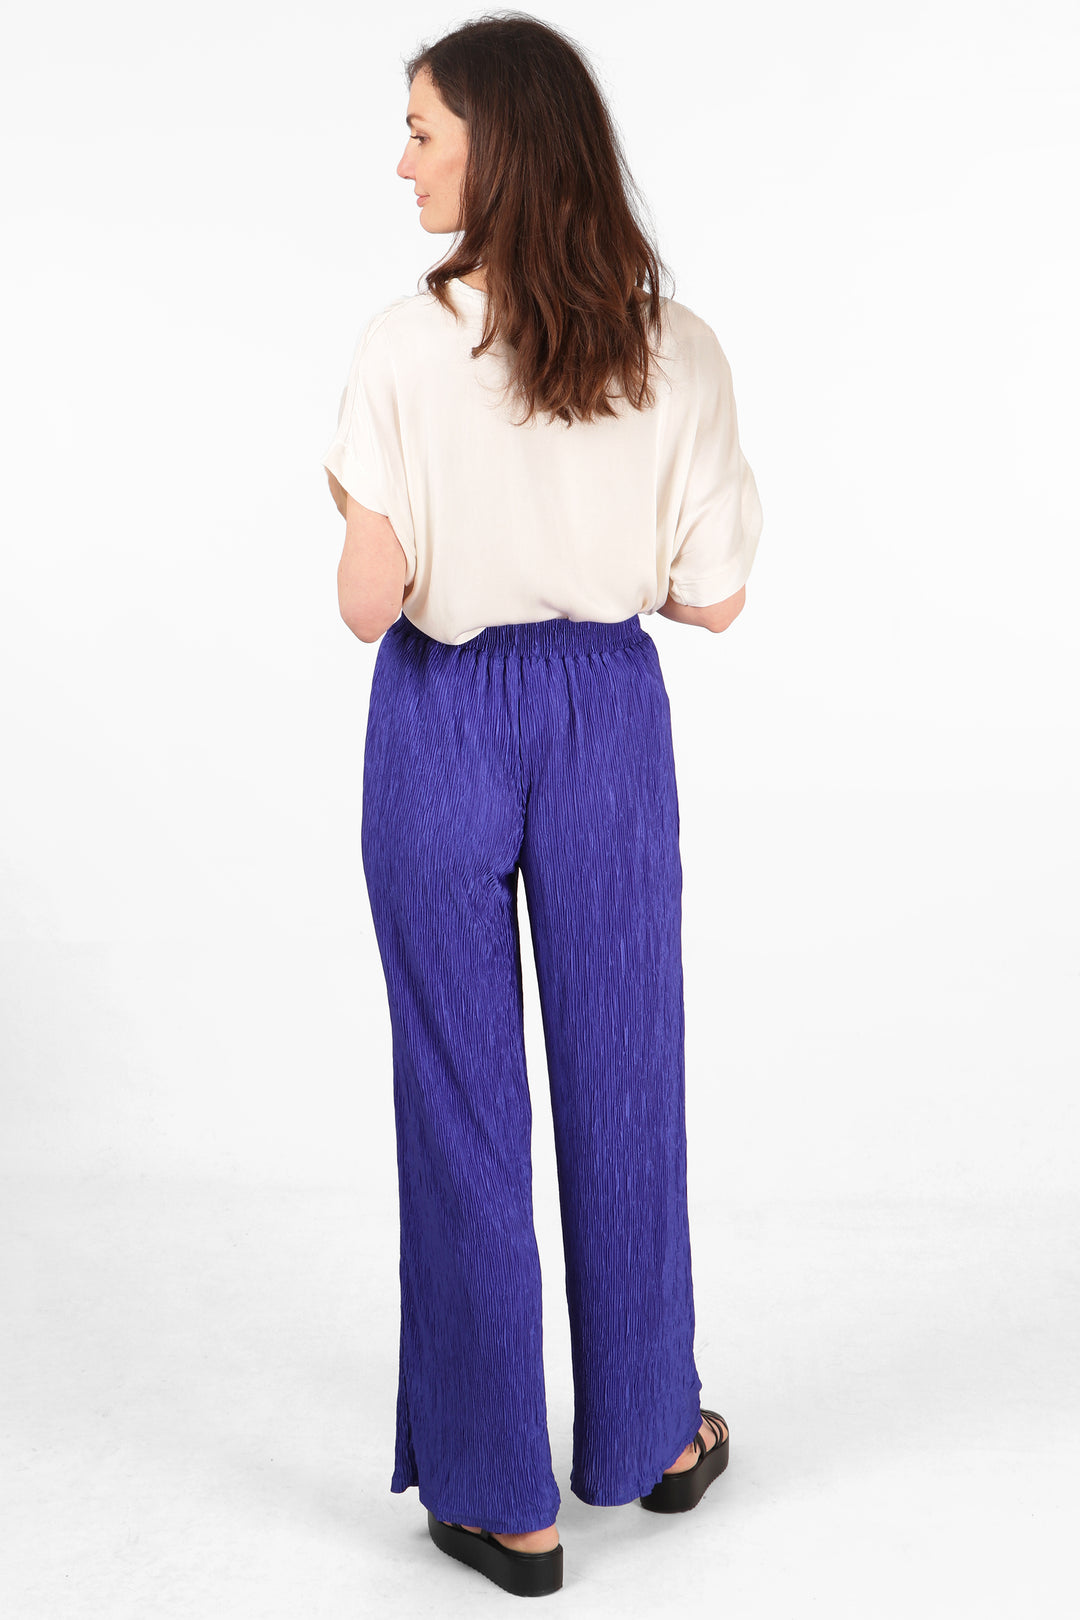 model showing the back of the royal blue plisse trousers